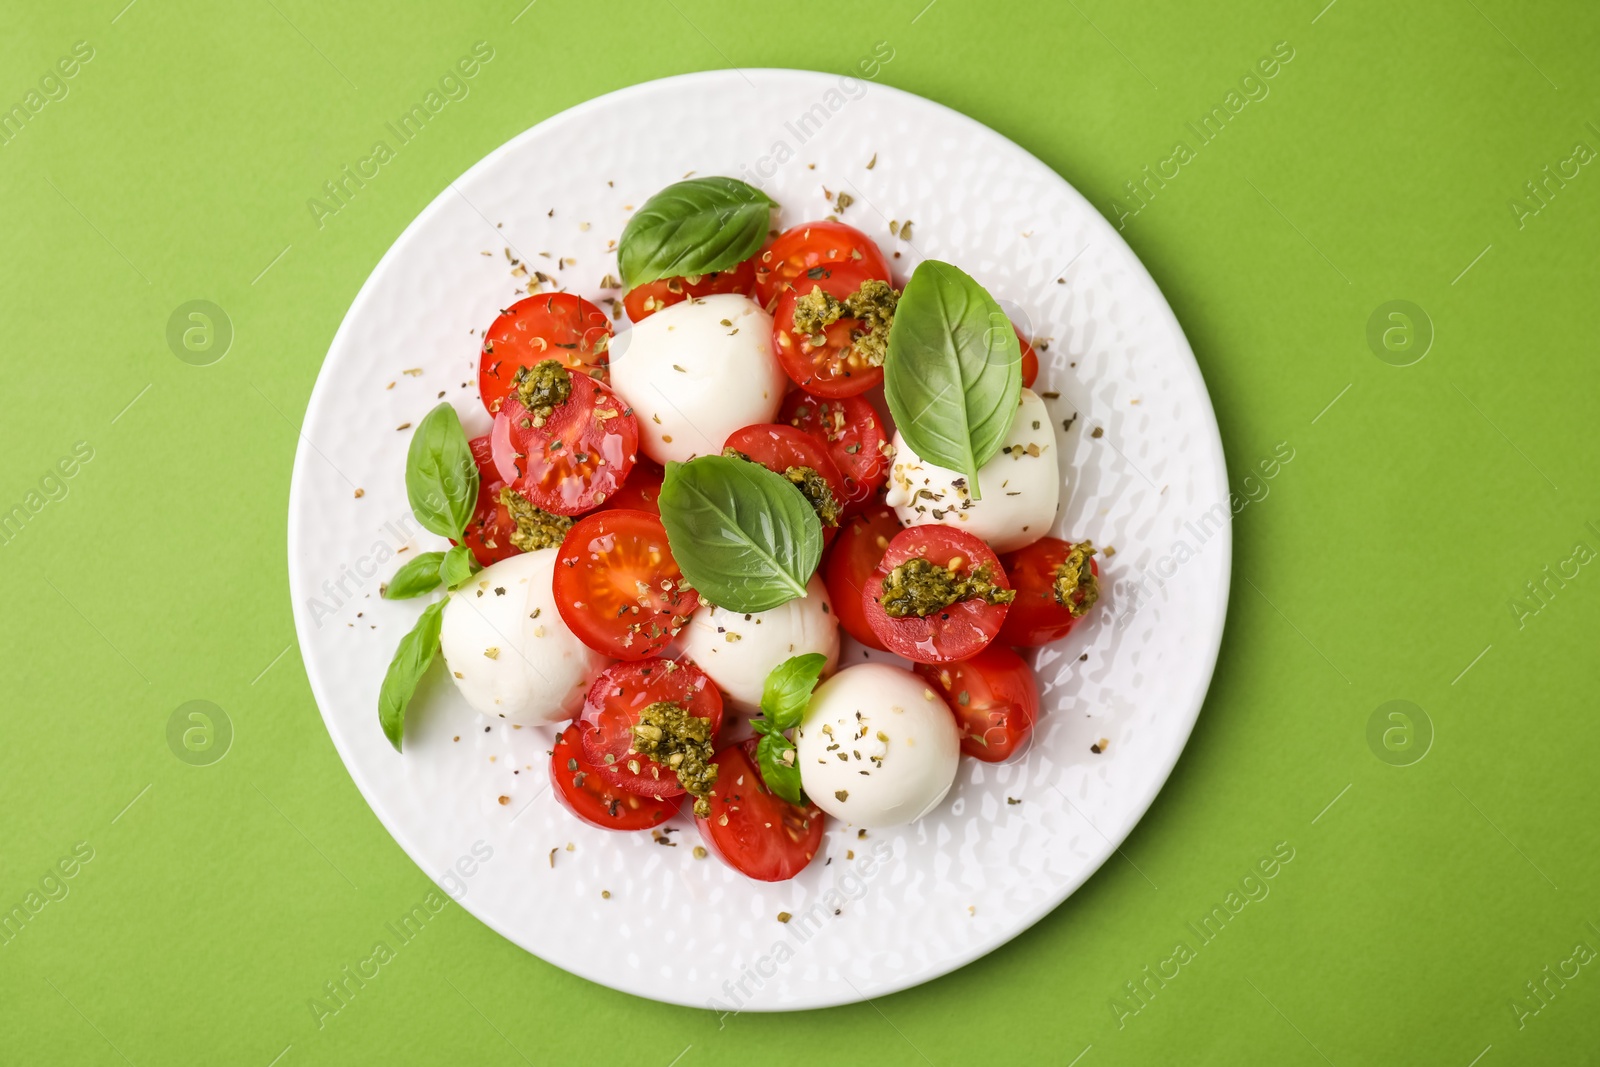 Photo of Tasty salad Caprese with tomatoes, mozzarella balls and basil on green background, top view